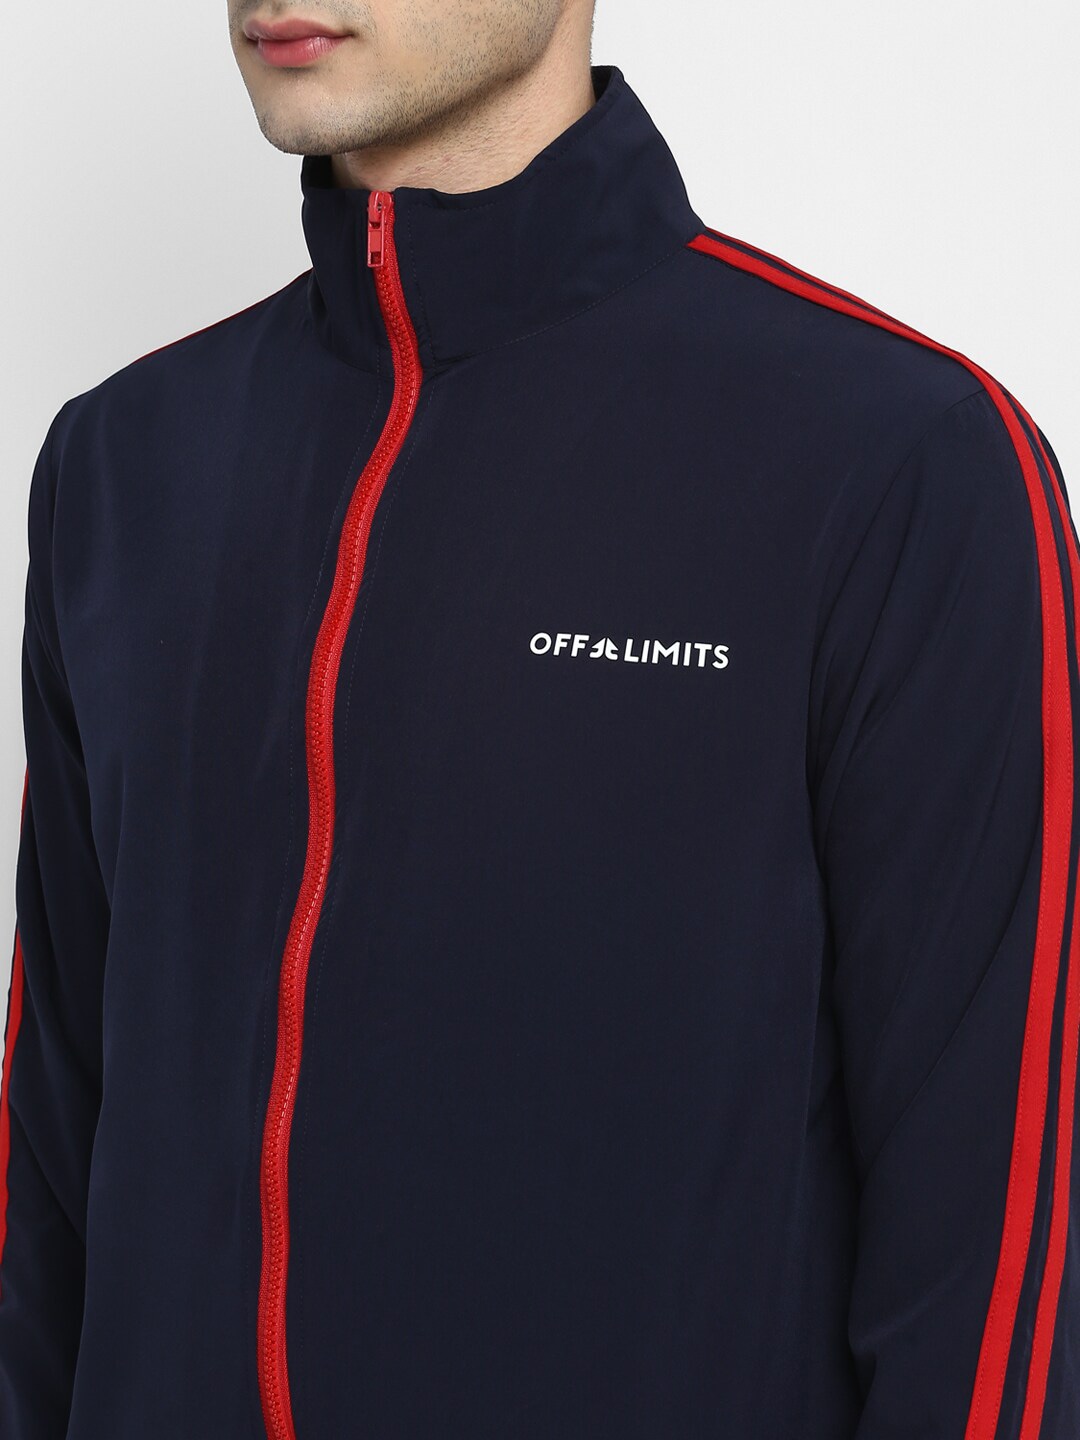 Clothing Tracksuits | OFF LIMITS Men Navy Blue & Red Solid Tracksuit - SC86251